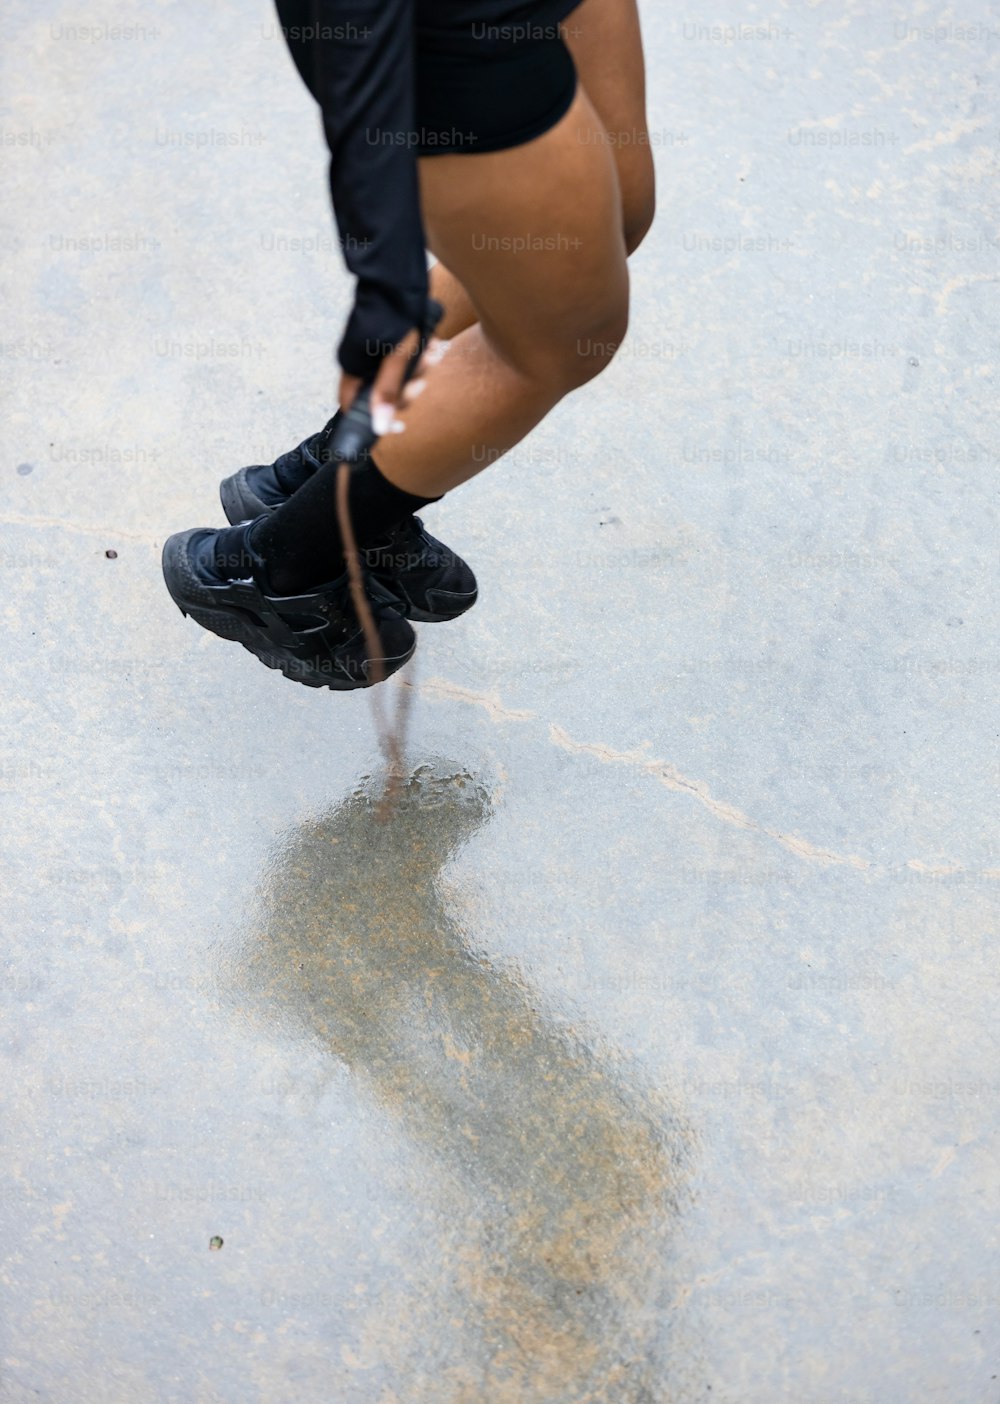 a person standing on a skateboard on a concrete surface